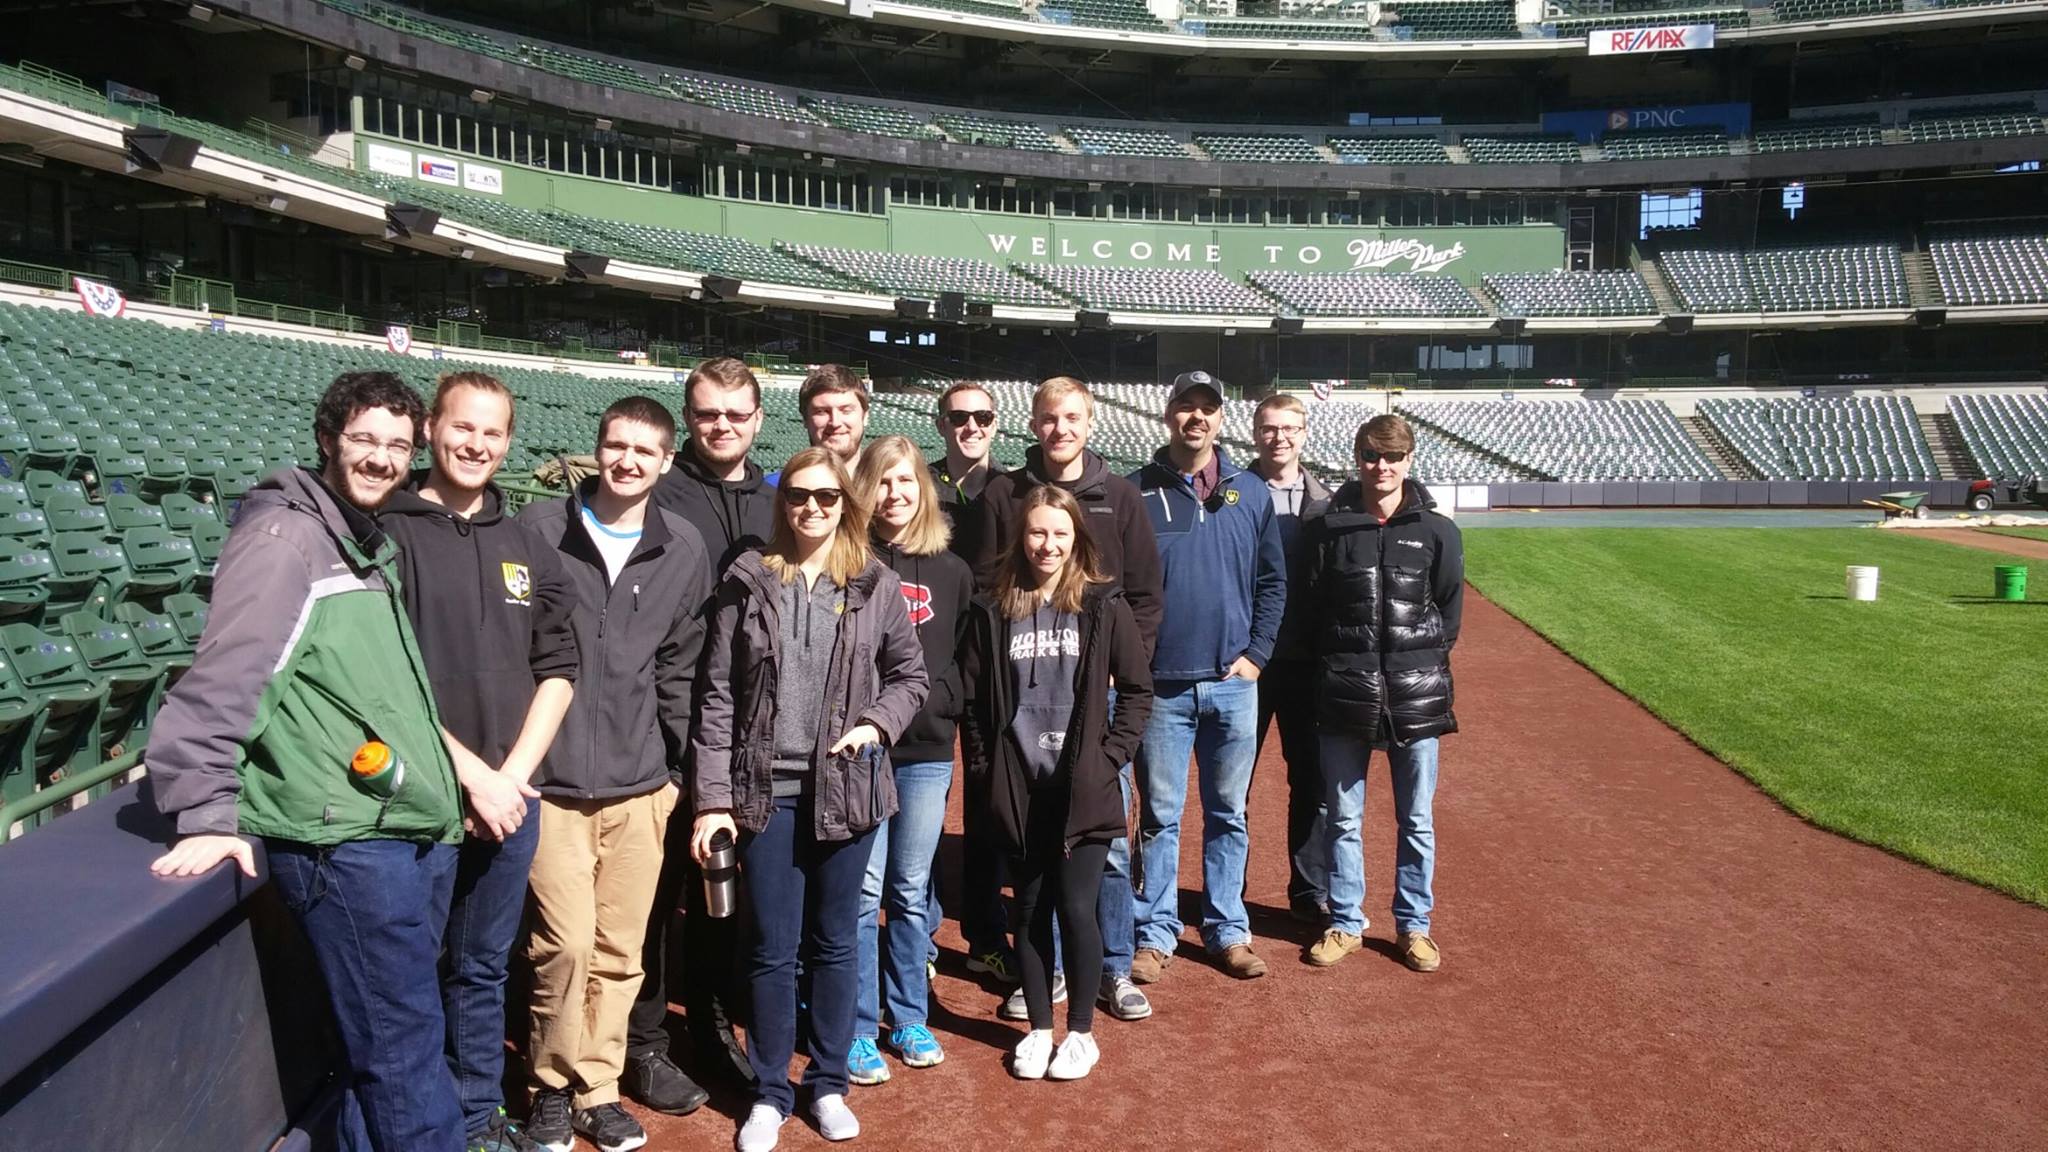 IW Students gathered at Miller Park on a partner visit circa 2016